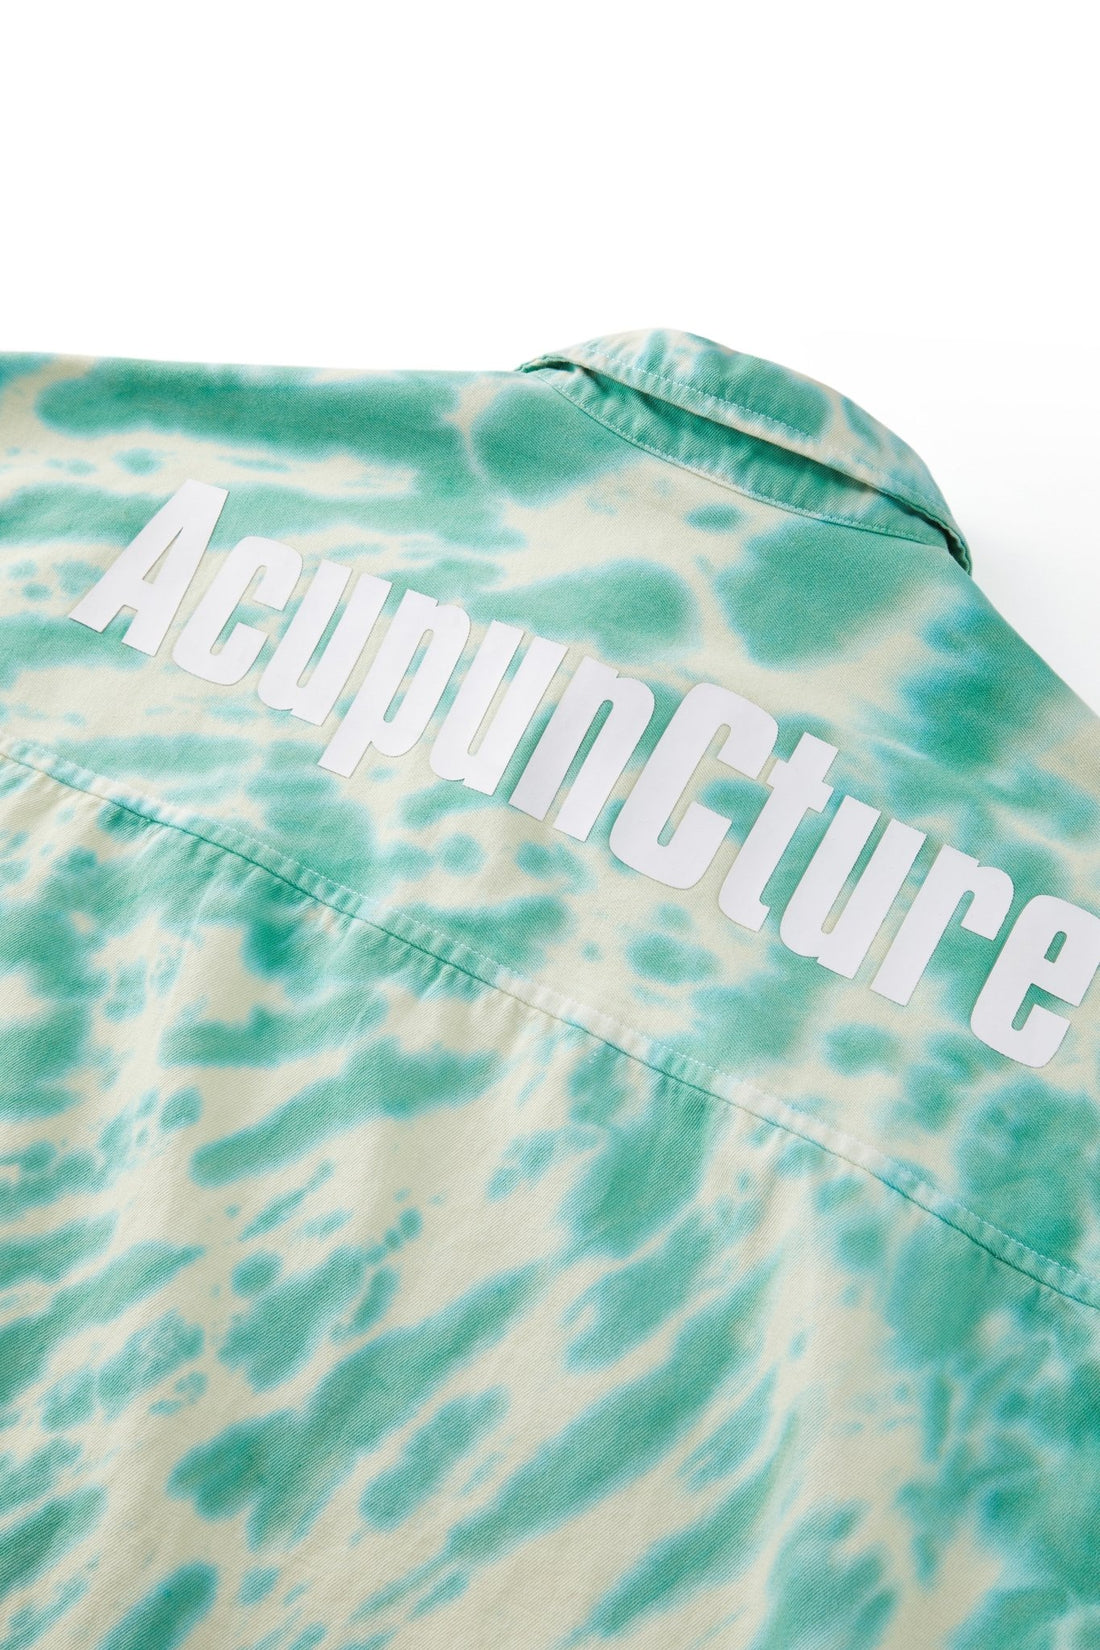 TIE DYE SHIRT MIXED GREEN Acupuncture